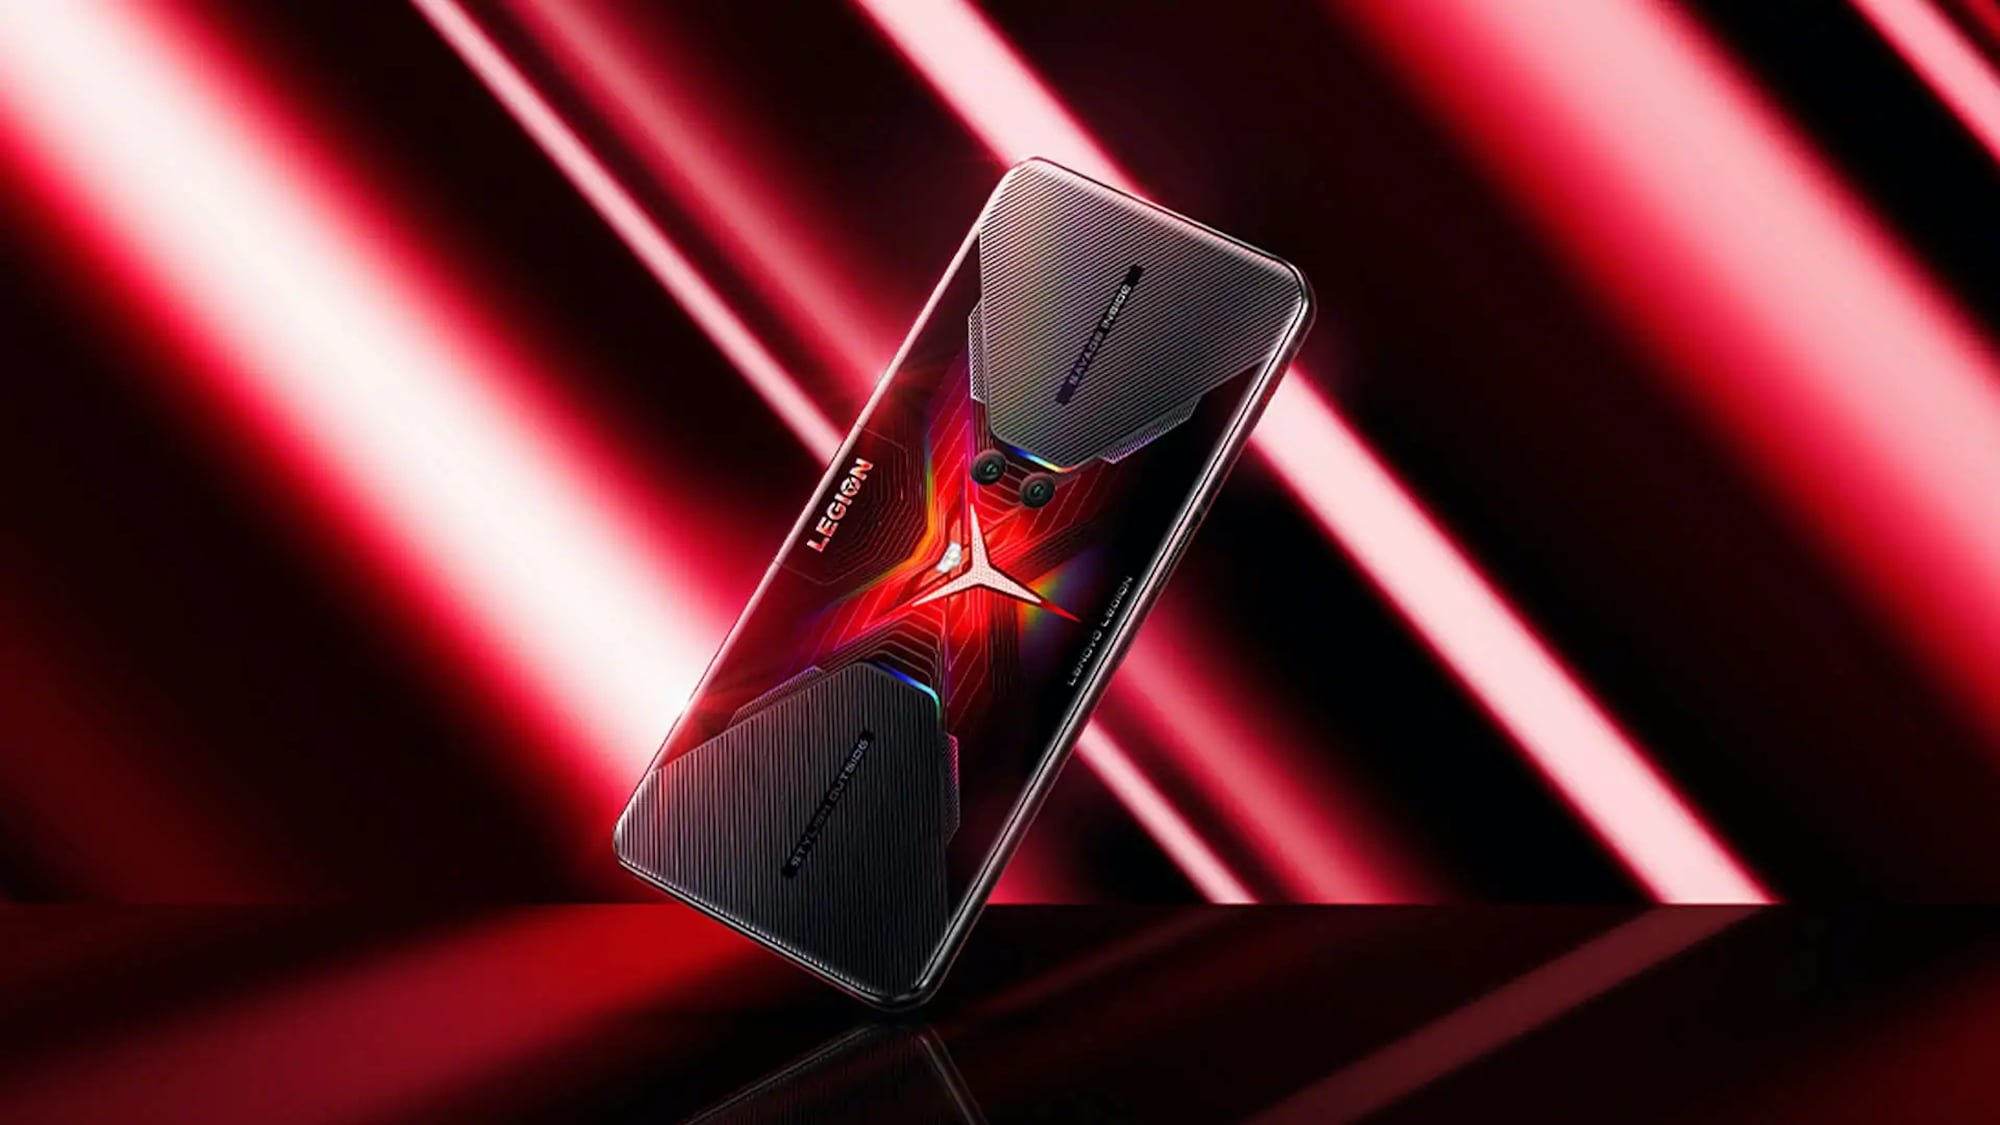 Lenovo Legion Gaming Smartphone features a pop-up front-facing camera